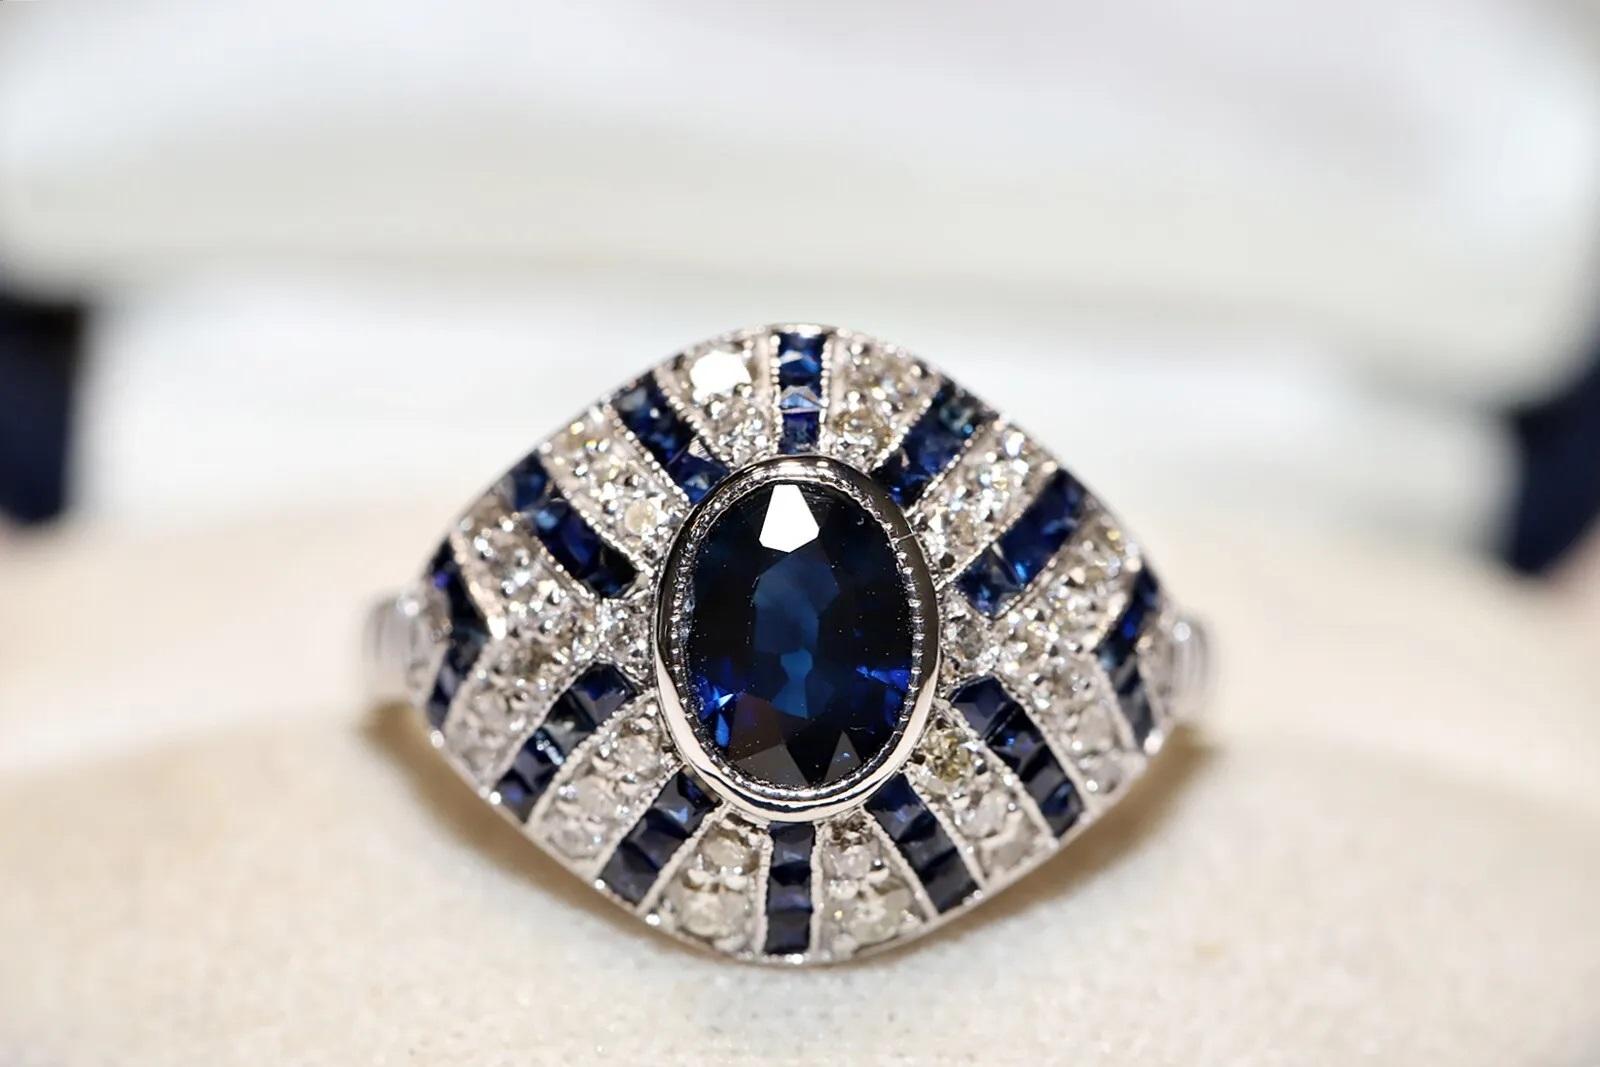 In very good condition.
Total weight is 4.5 gram.
Totally is diamond 0.58 carat.
The diamond is has G-H color and vvs-vs...
Totally is sapphire 2.10 carat .
Ring size is US 6.5 (We offer free resizing)
We can make any size.
Box is not